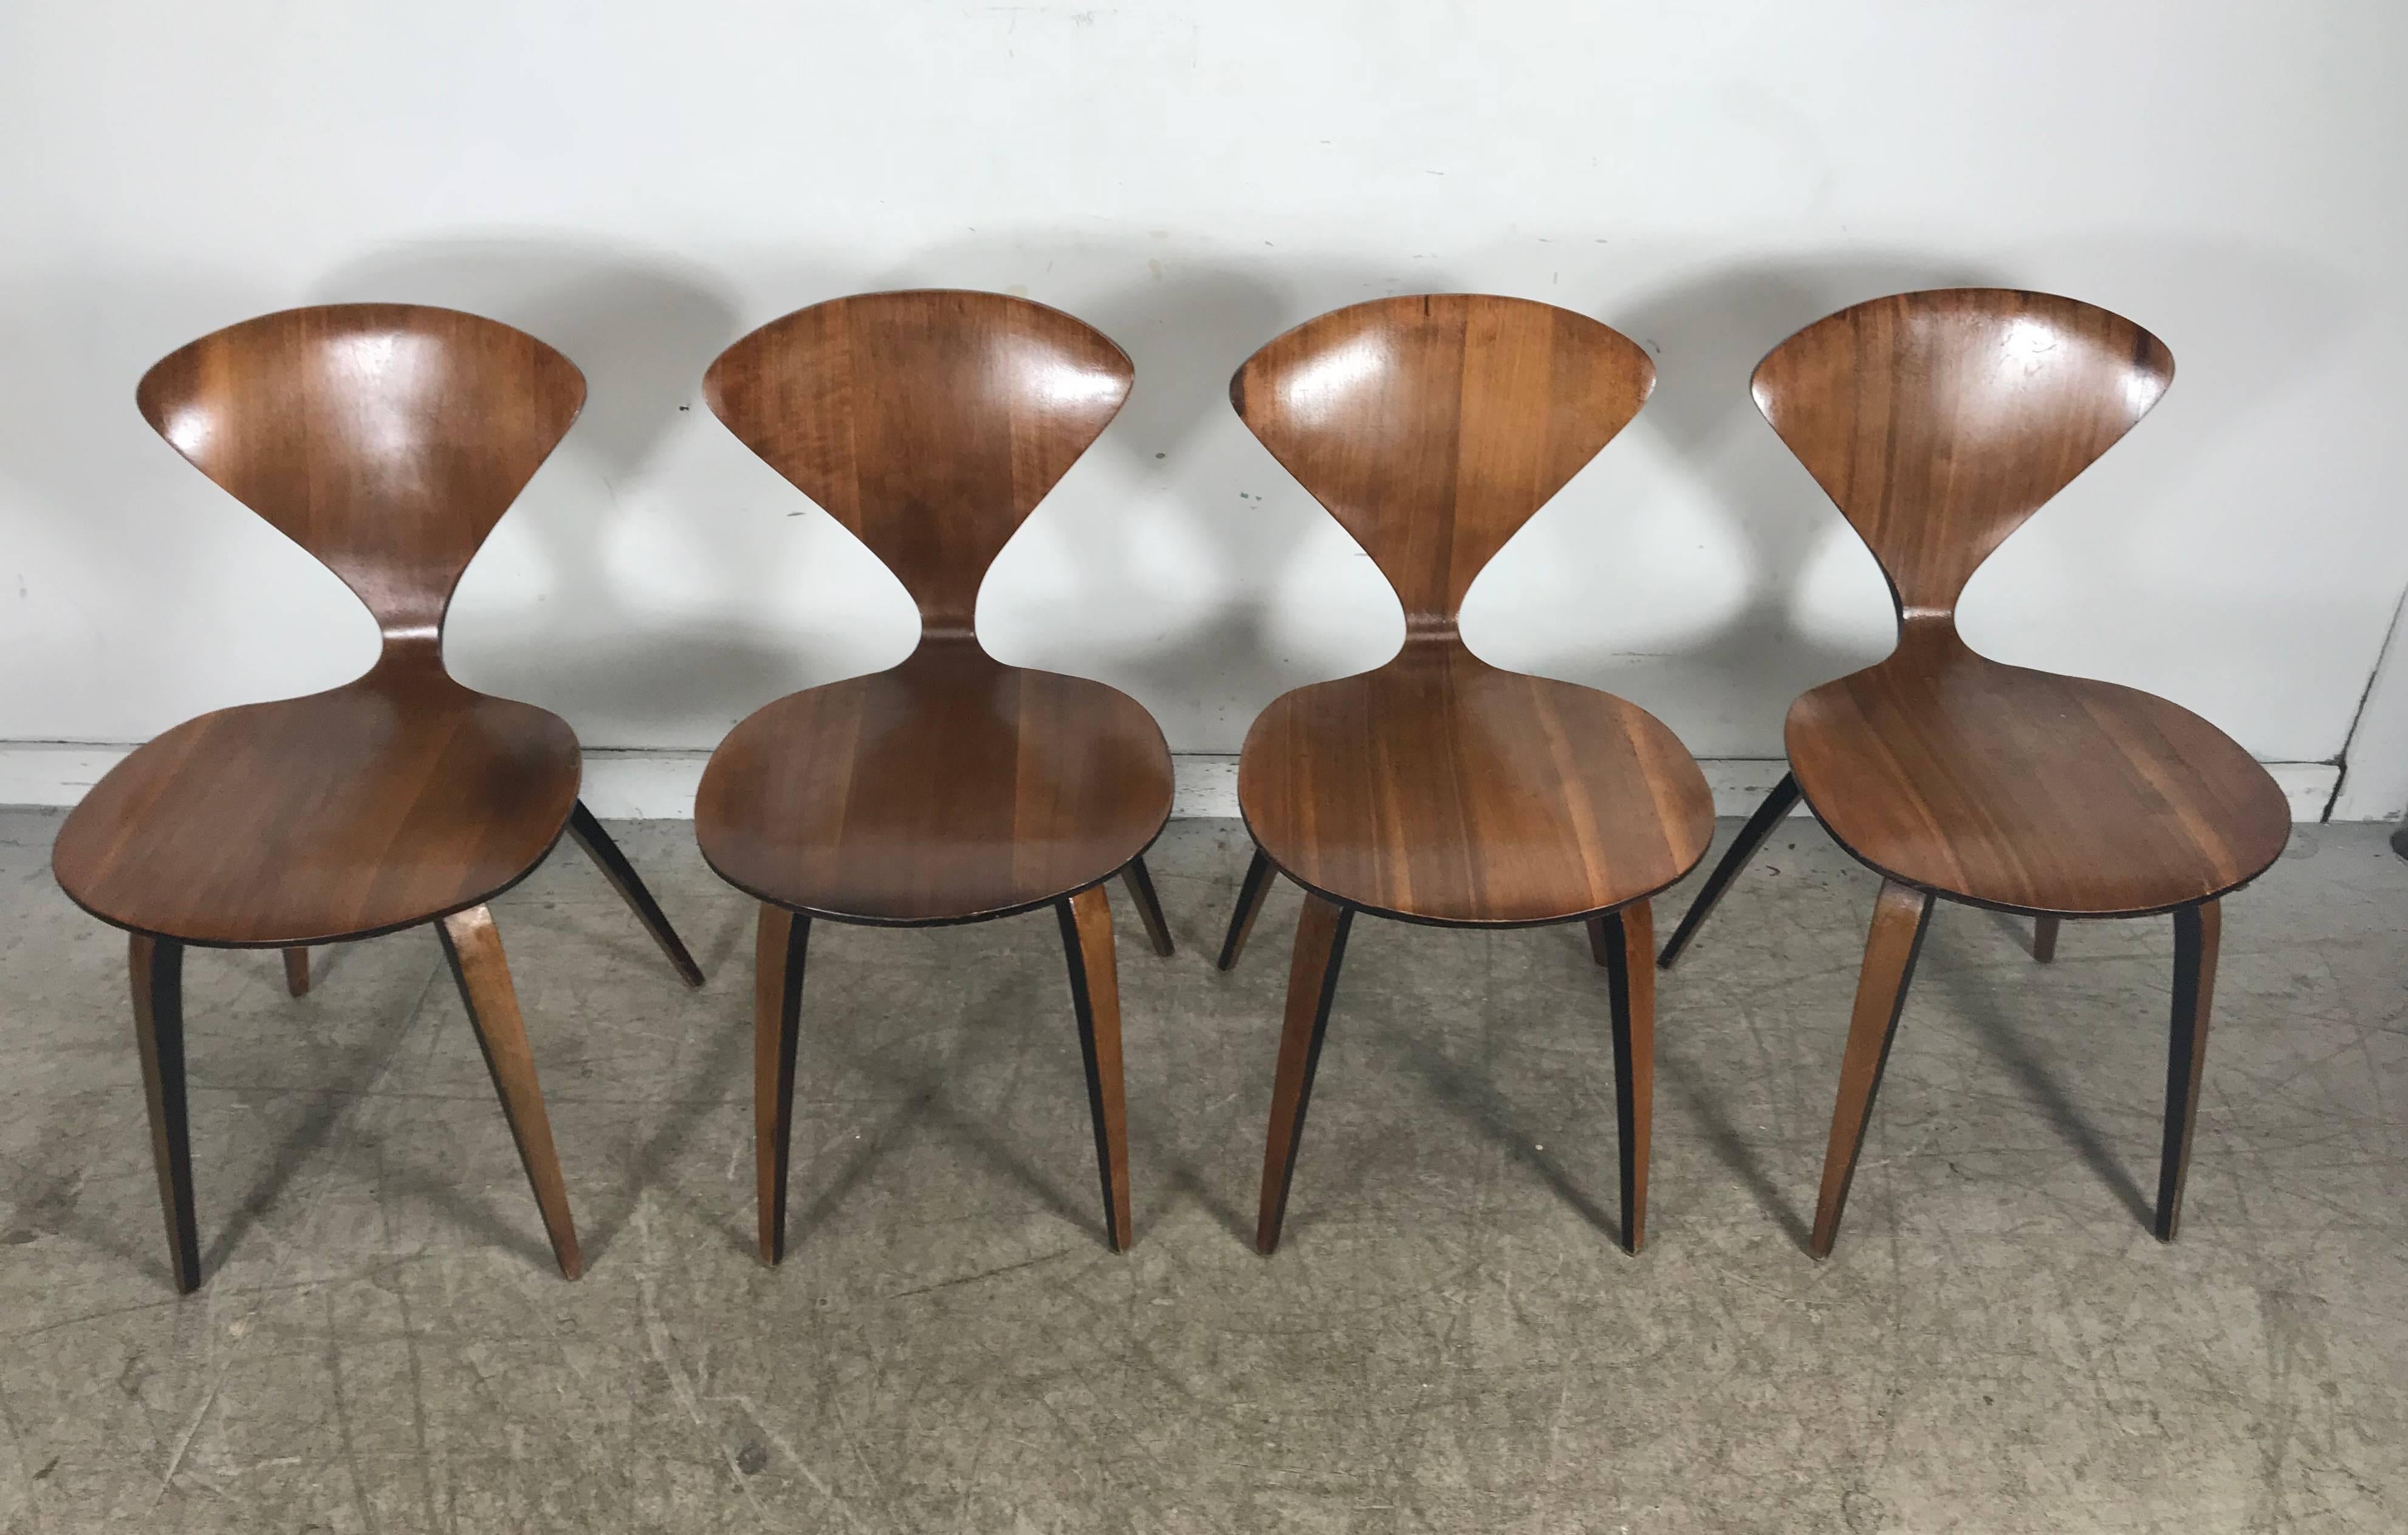 Classic Mid-Century Modern molded and bent plywood side chairs by Norman Cherner for Plycraft, retain early Plycraft label. Original finish, age appropriate wear. Minor veneer chip to one chair, see photo. Extremely comfortable, structurally sound.